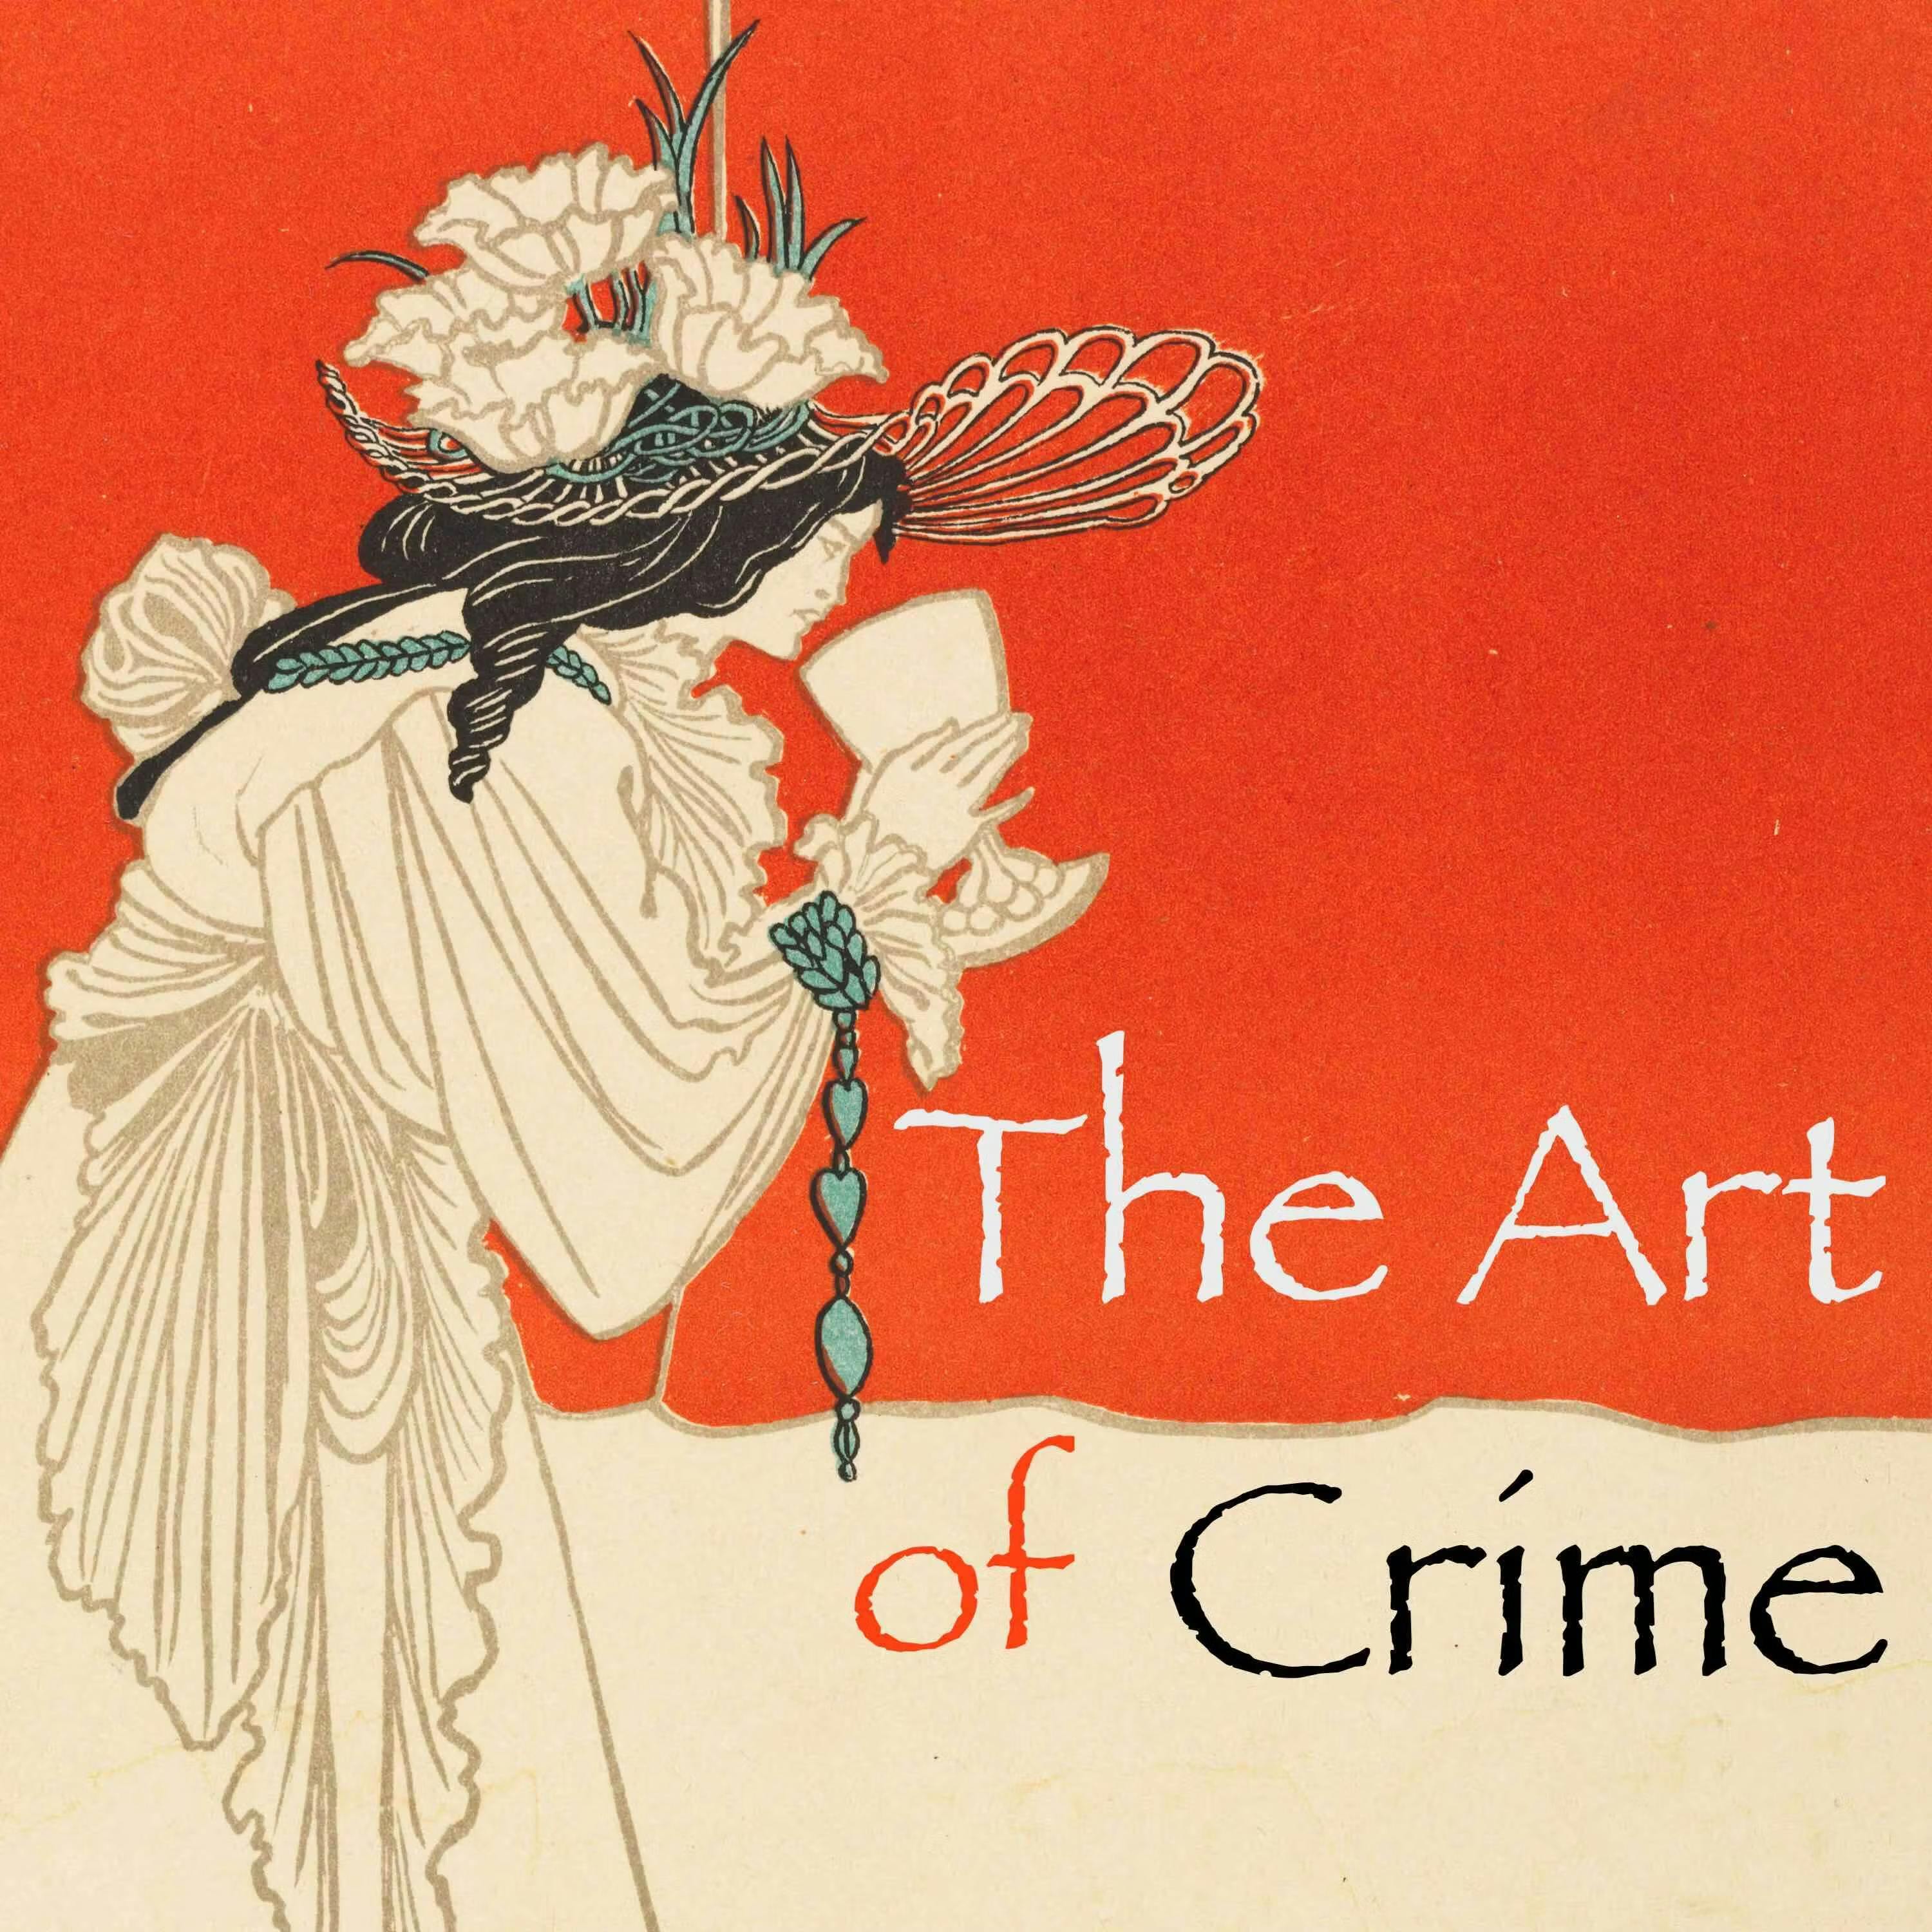 Introducing: The Art of Crime